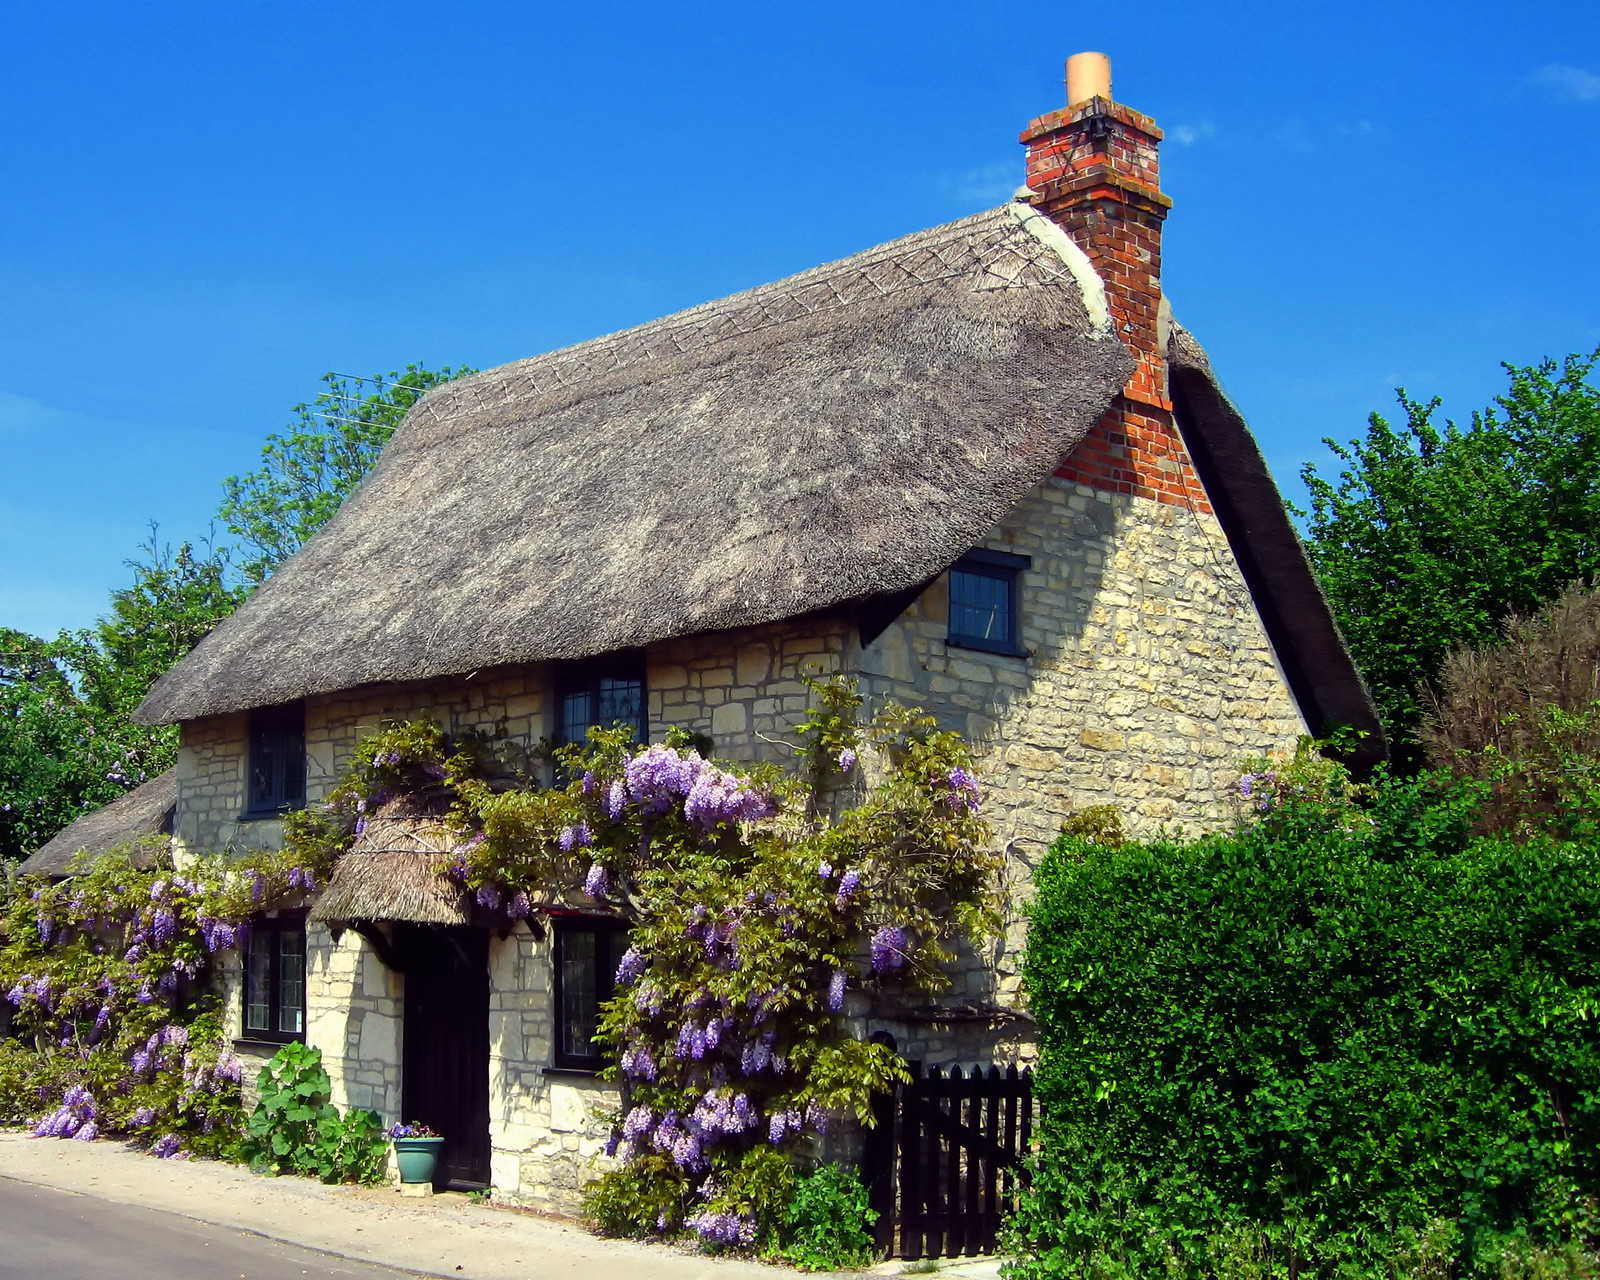 Thatched cottage in Wiltshire. Credit JohnPickenPhoto